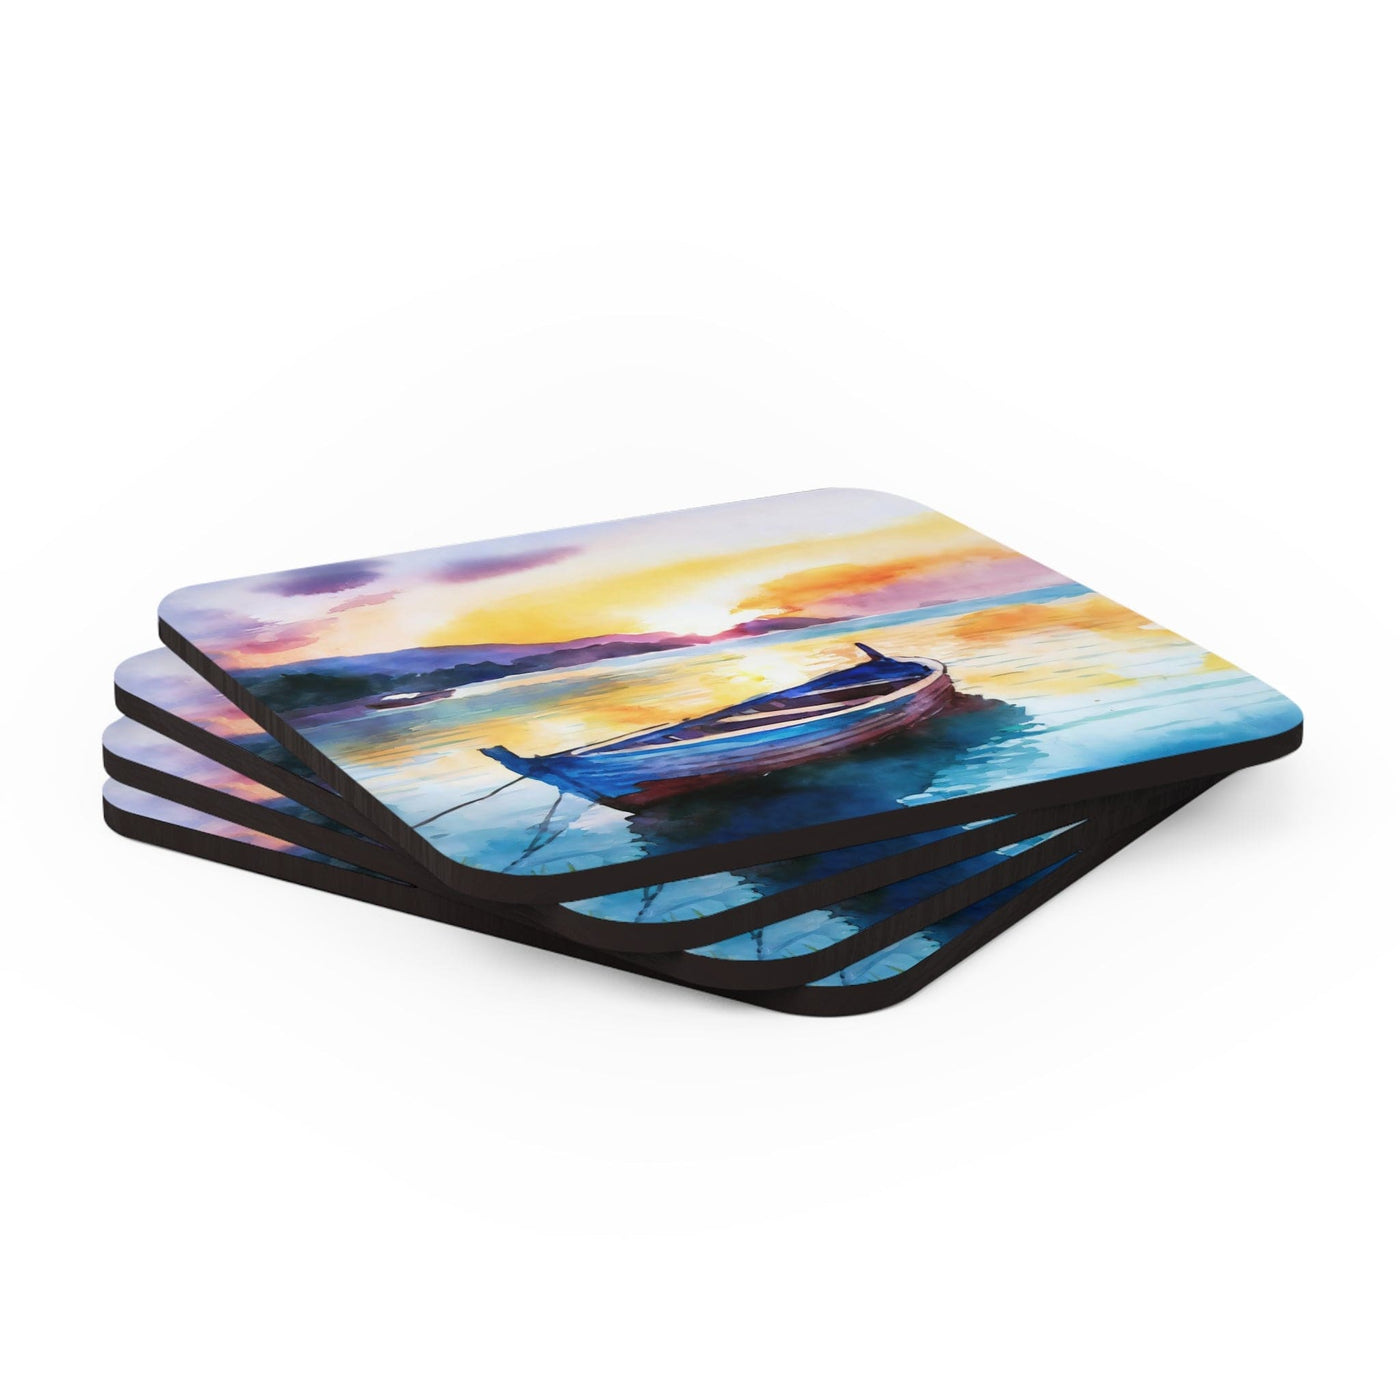 Coaster Set Of 4 For Drinks Sunset By The Sea Print - Decorative | Coasters